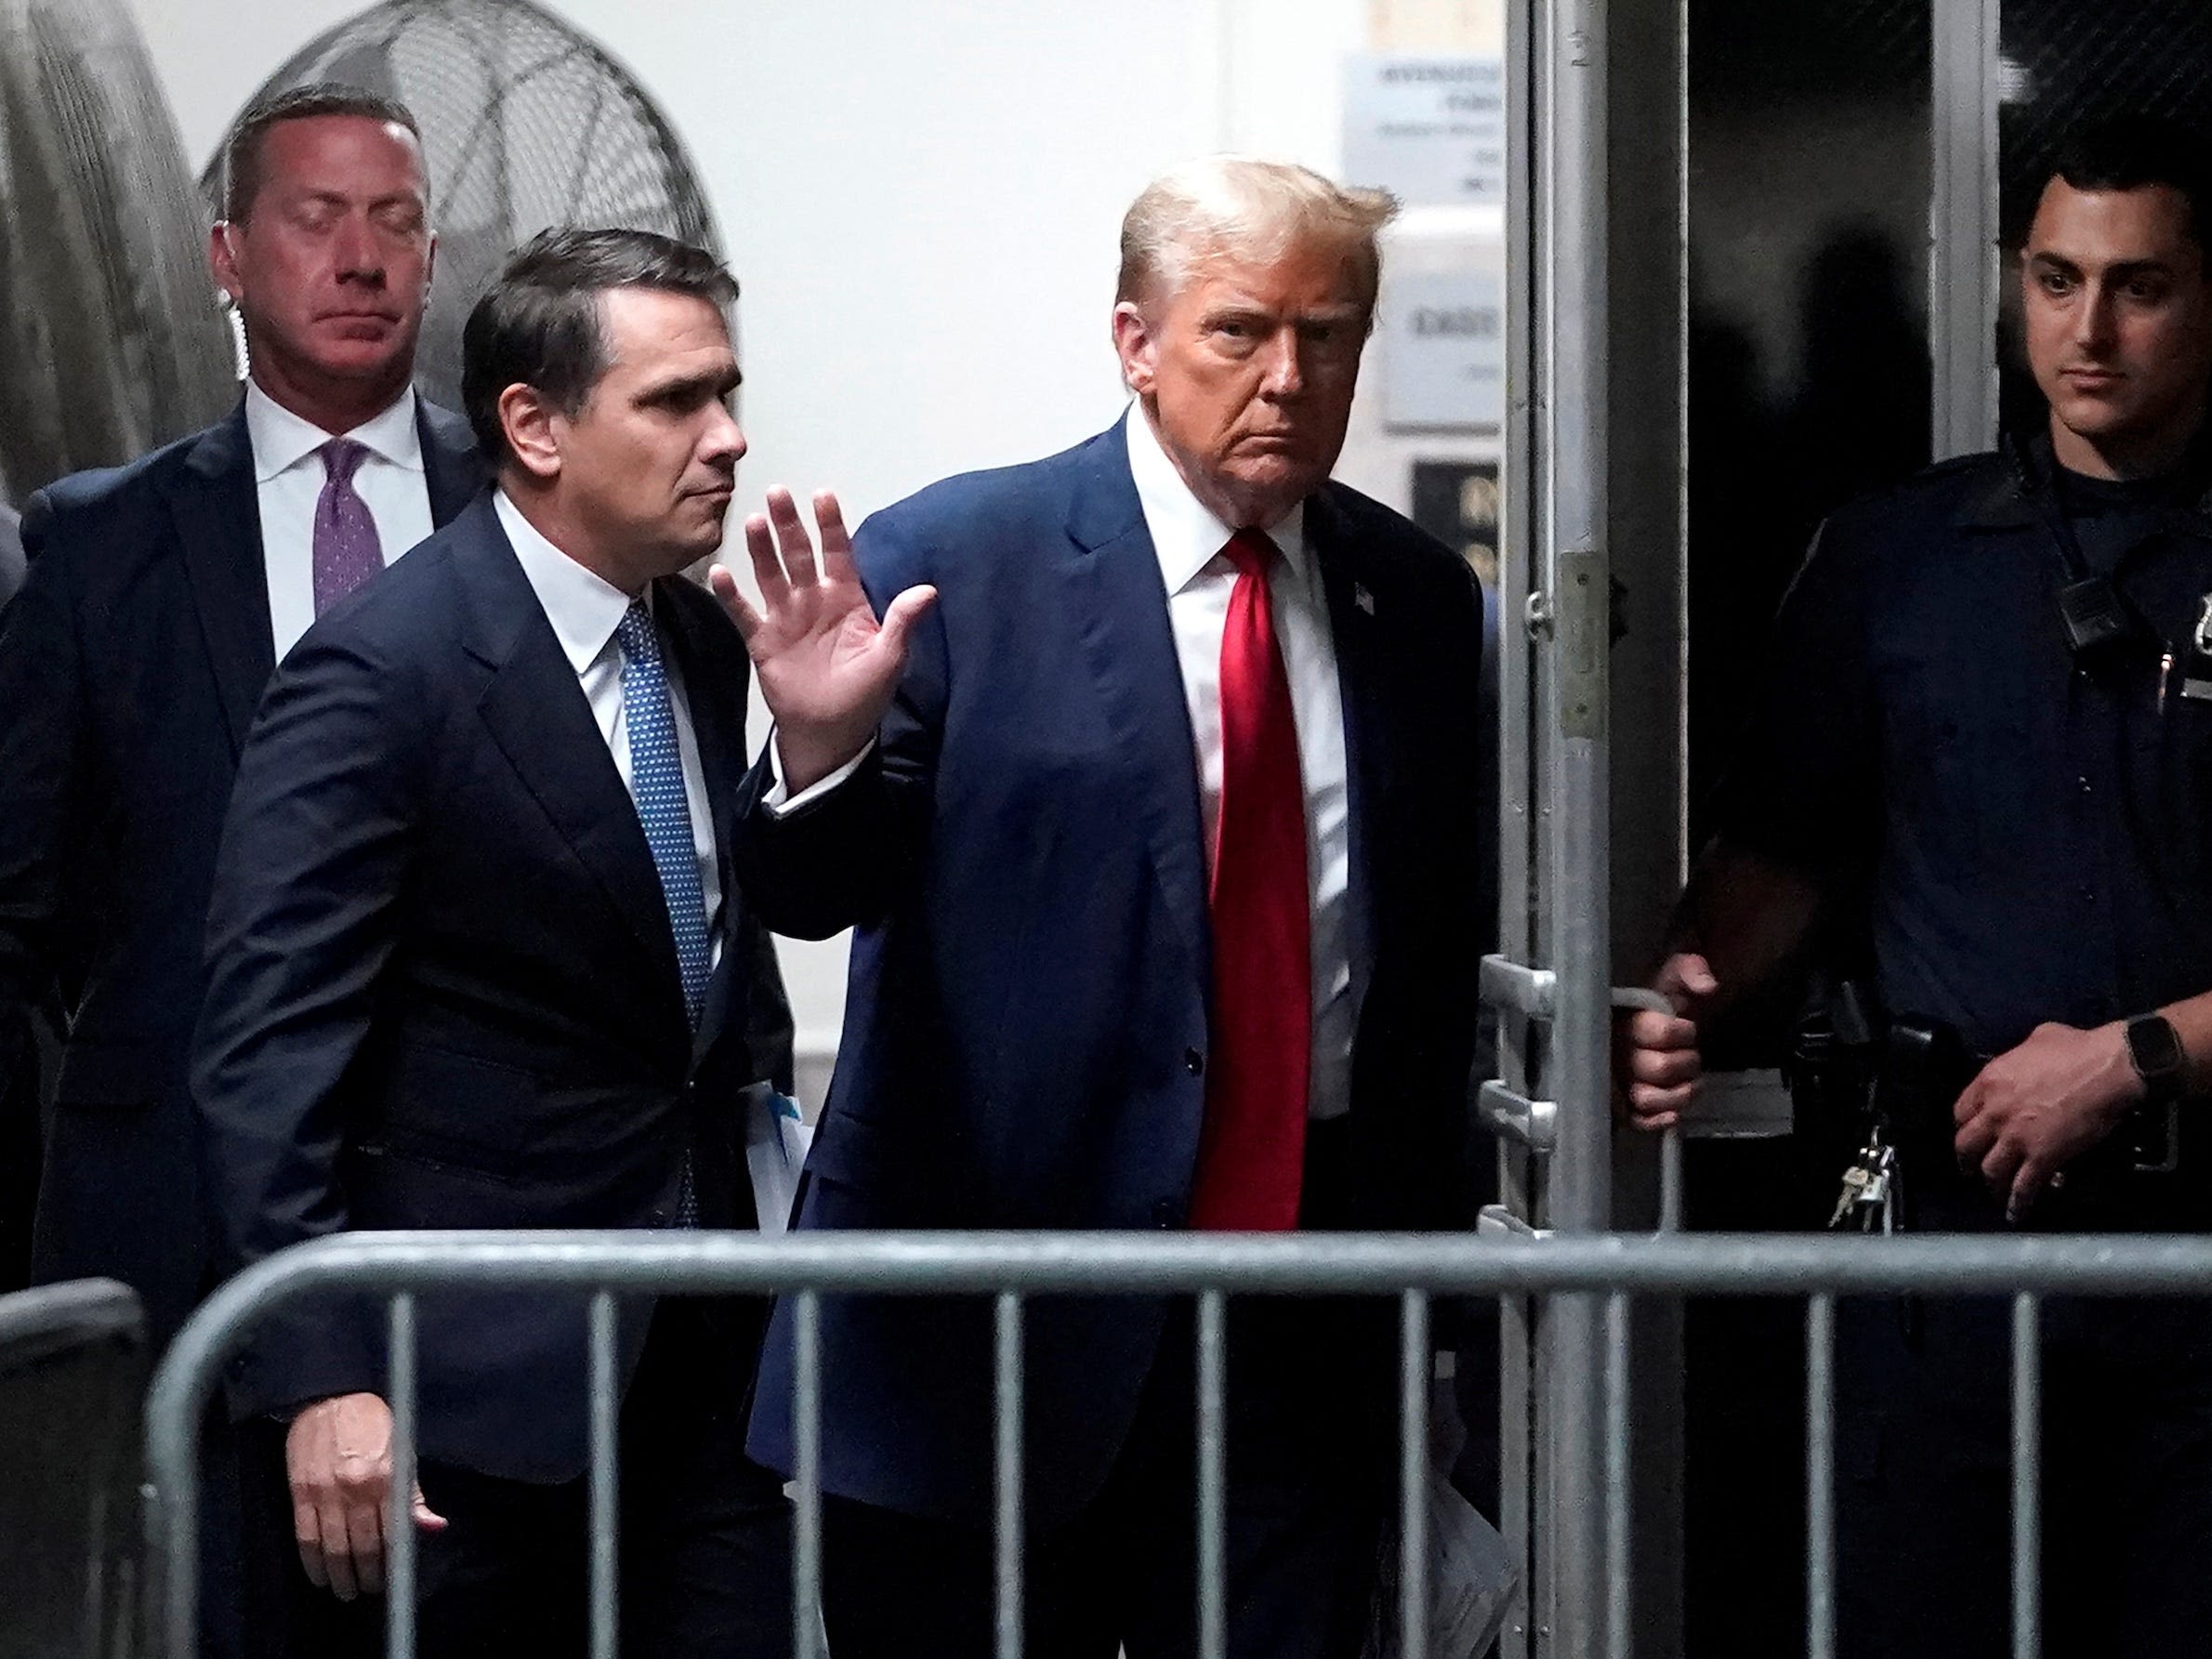 Jailing Trump on contempt would likely mean locking him up for an hour or two behind the courtroom, experts predict